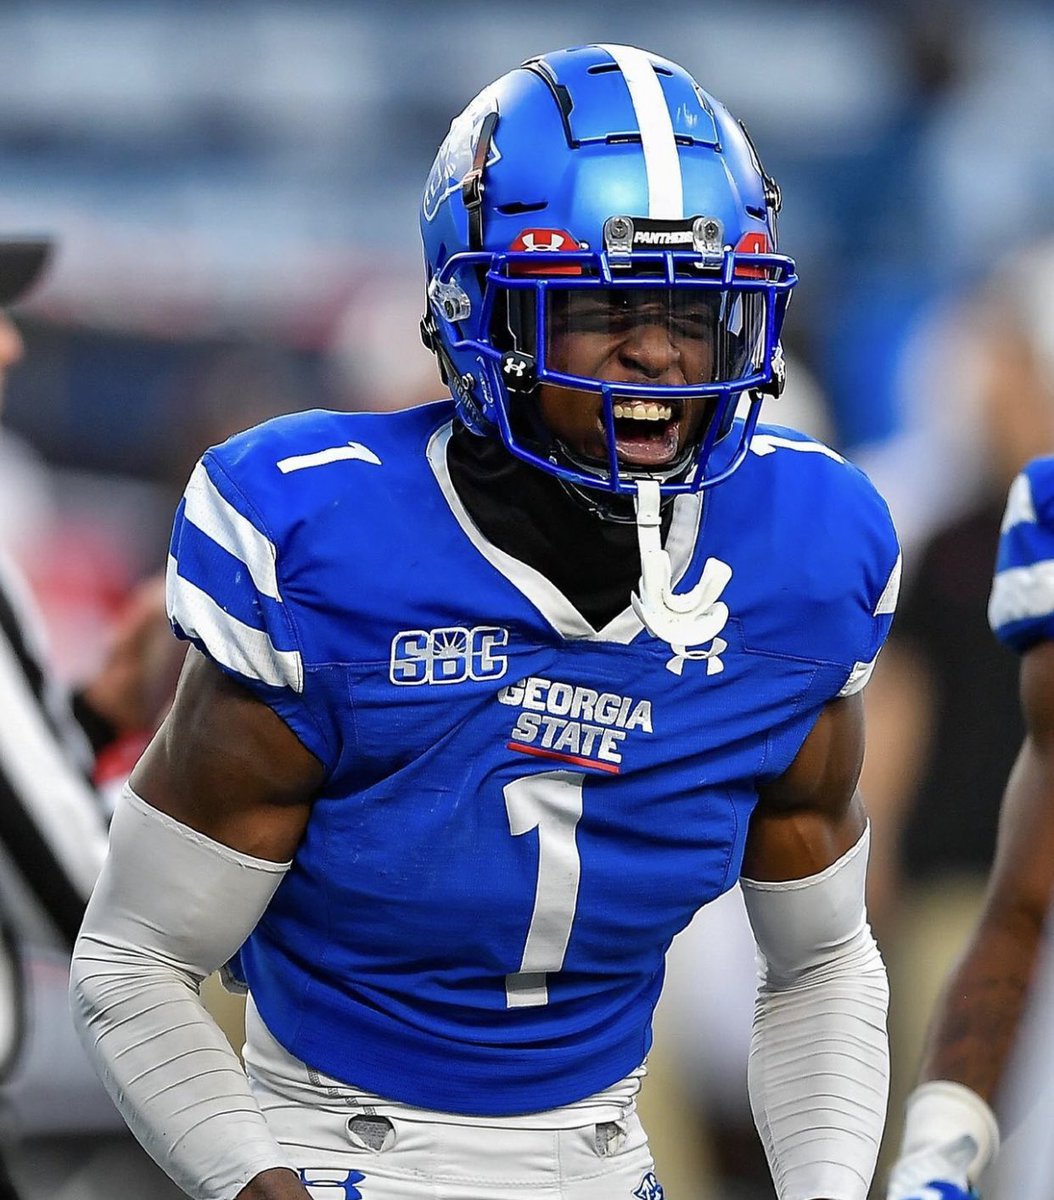 Bless to receive an offer from Georgia State University #AGTG #GSU